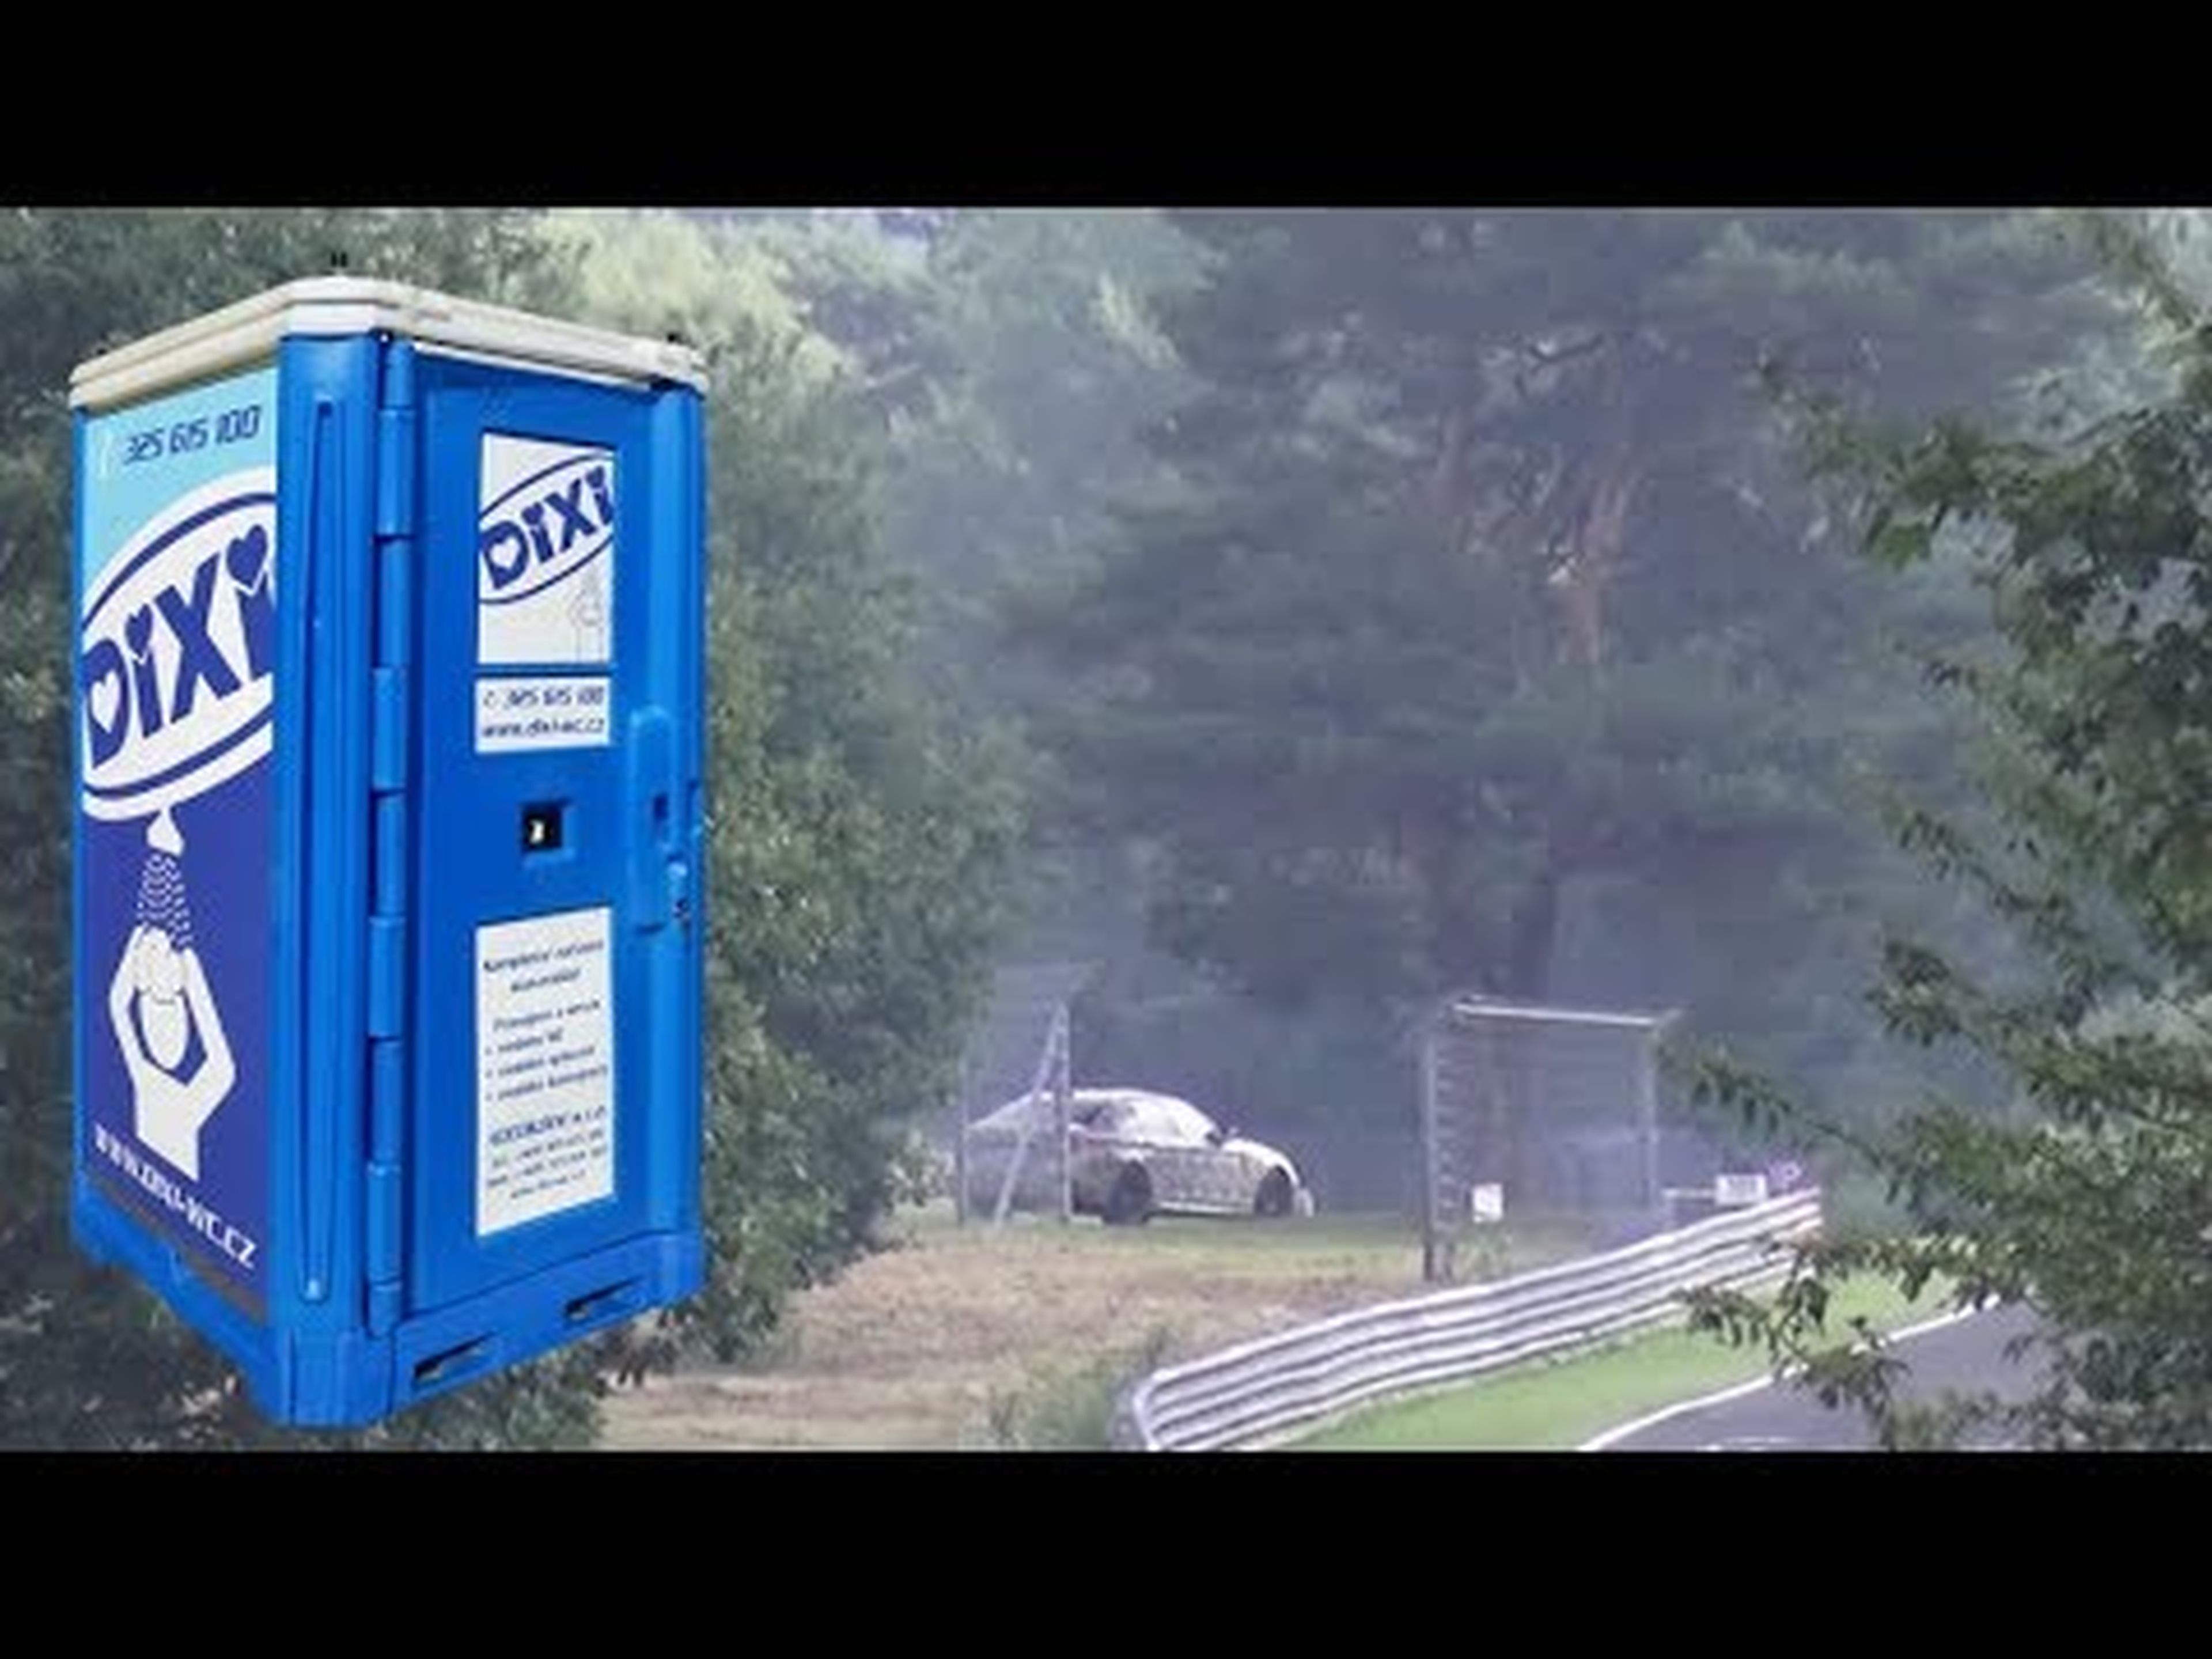 2018 BMW M5 Driver Stops in the middle of the Nordschleife.... TO TAKE A PISS!